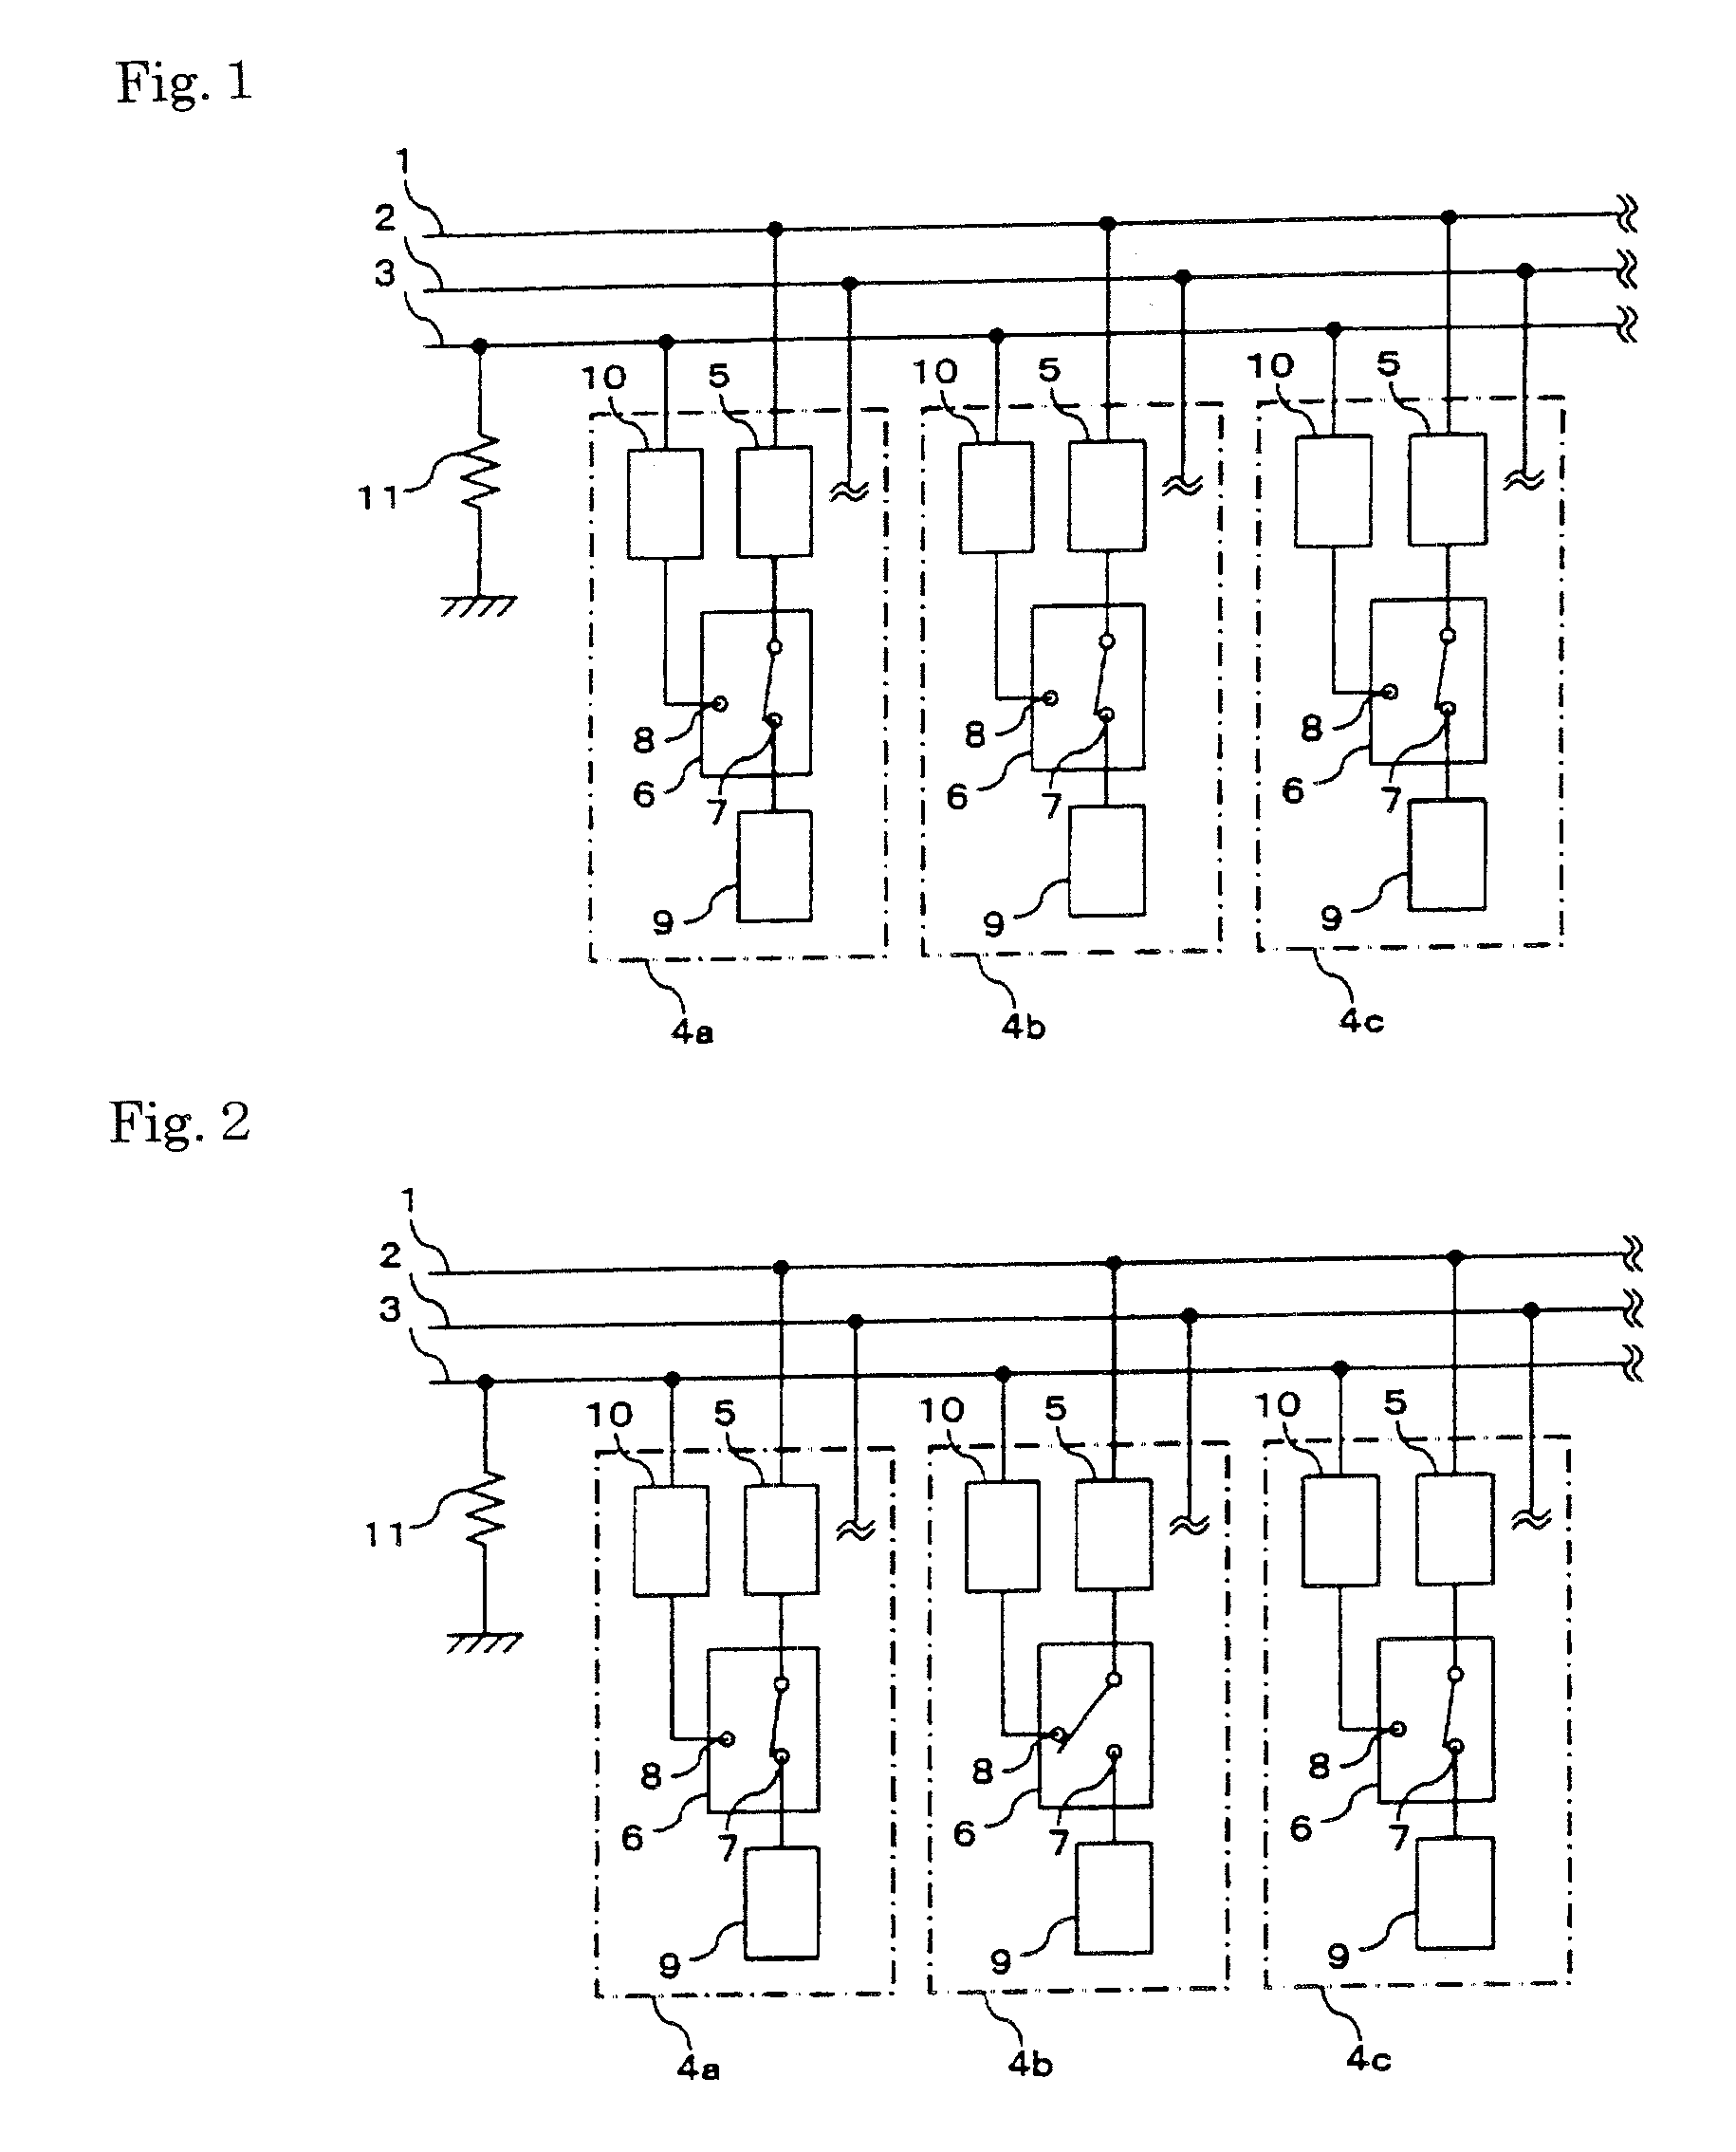 Power feed system for vehicle